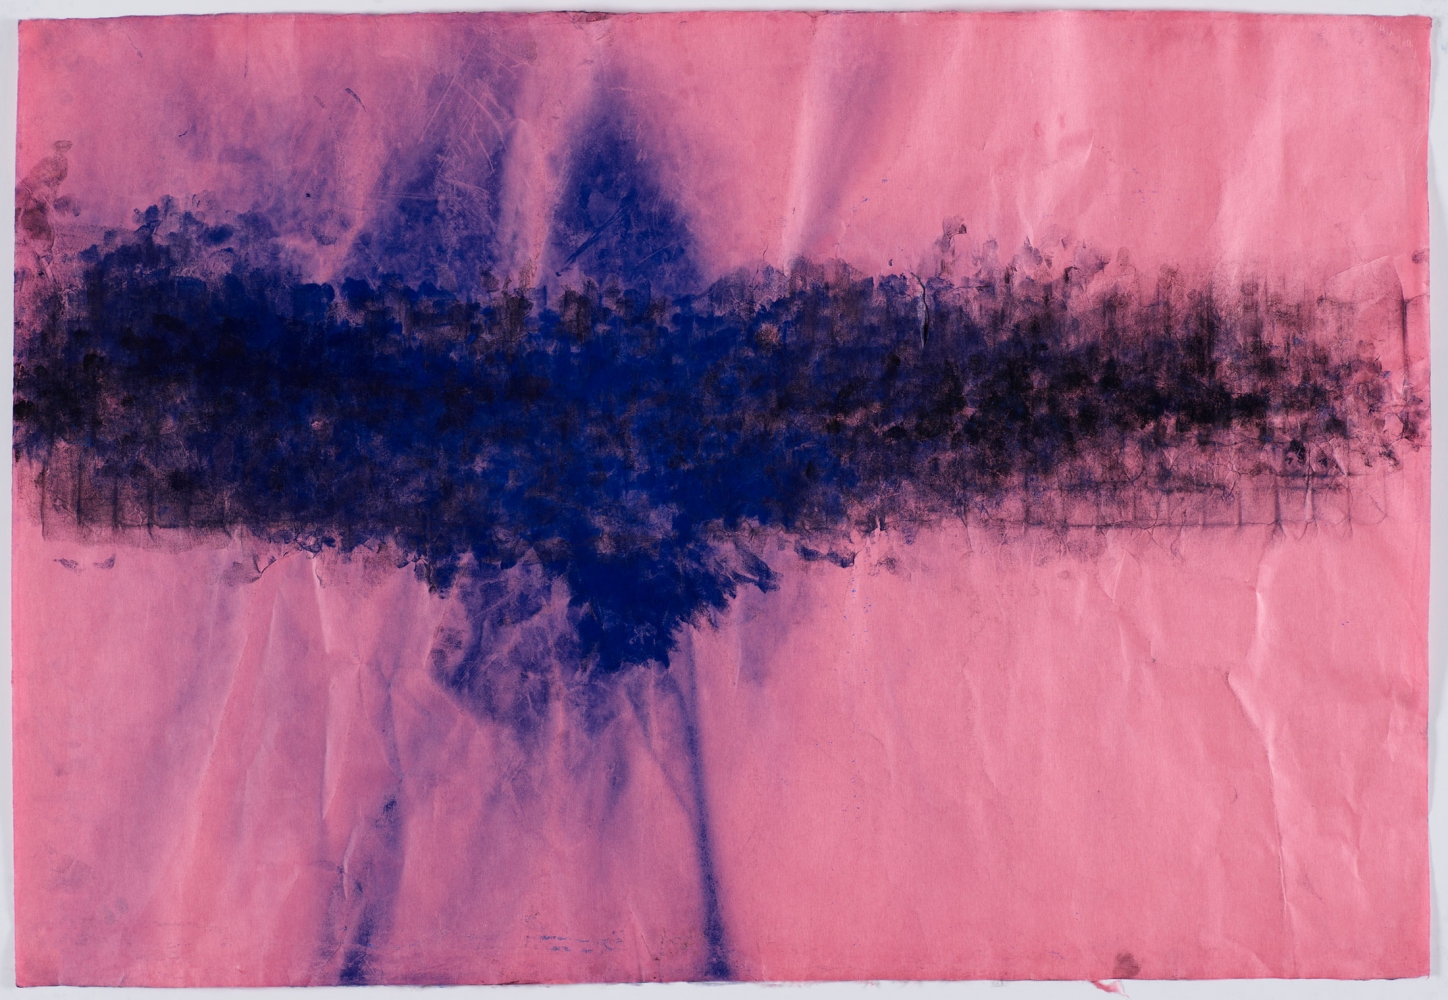 Jason Moran
Two Wings 2, 2019
Dry pigment on Gampi paper
25 1/4 x 38 inches
(64.1 x 96.5 cm)